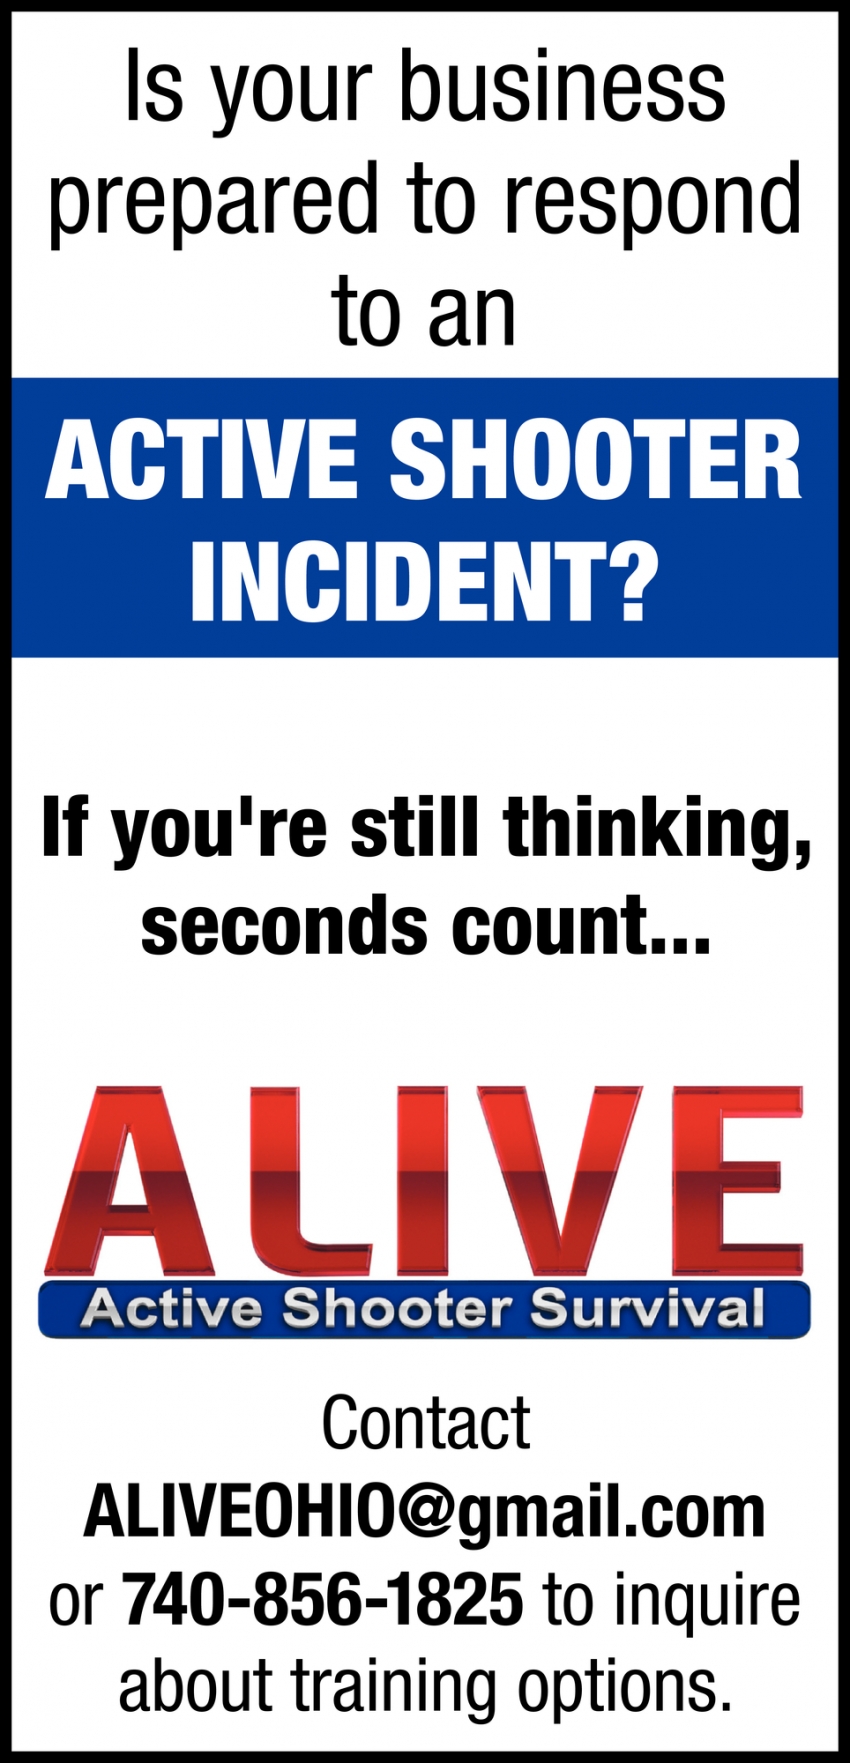 Is Your Business Prepared To Respond To An Active Shooter Incident?